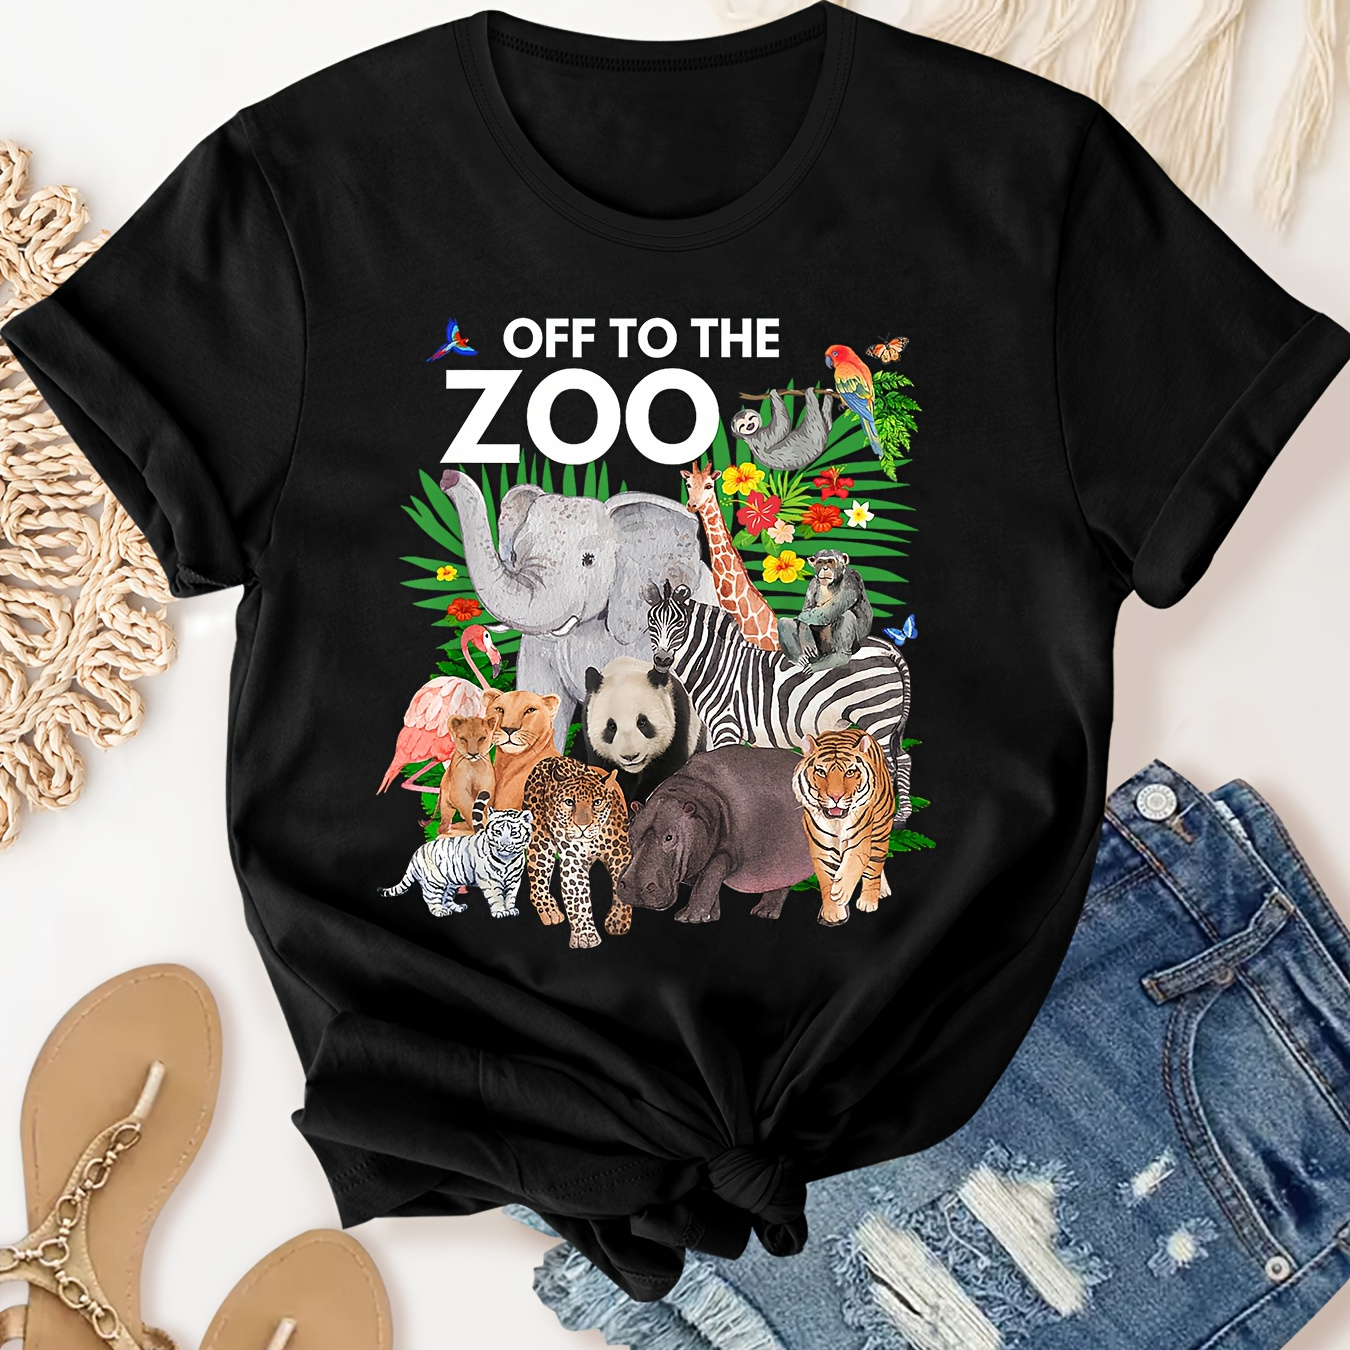 

Women's Casual "off To " Printed T-shirt, Retro Comfort, Short-sleeve Top, Tee With Animal Graphics